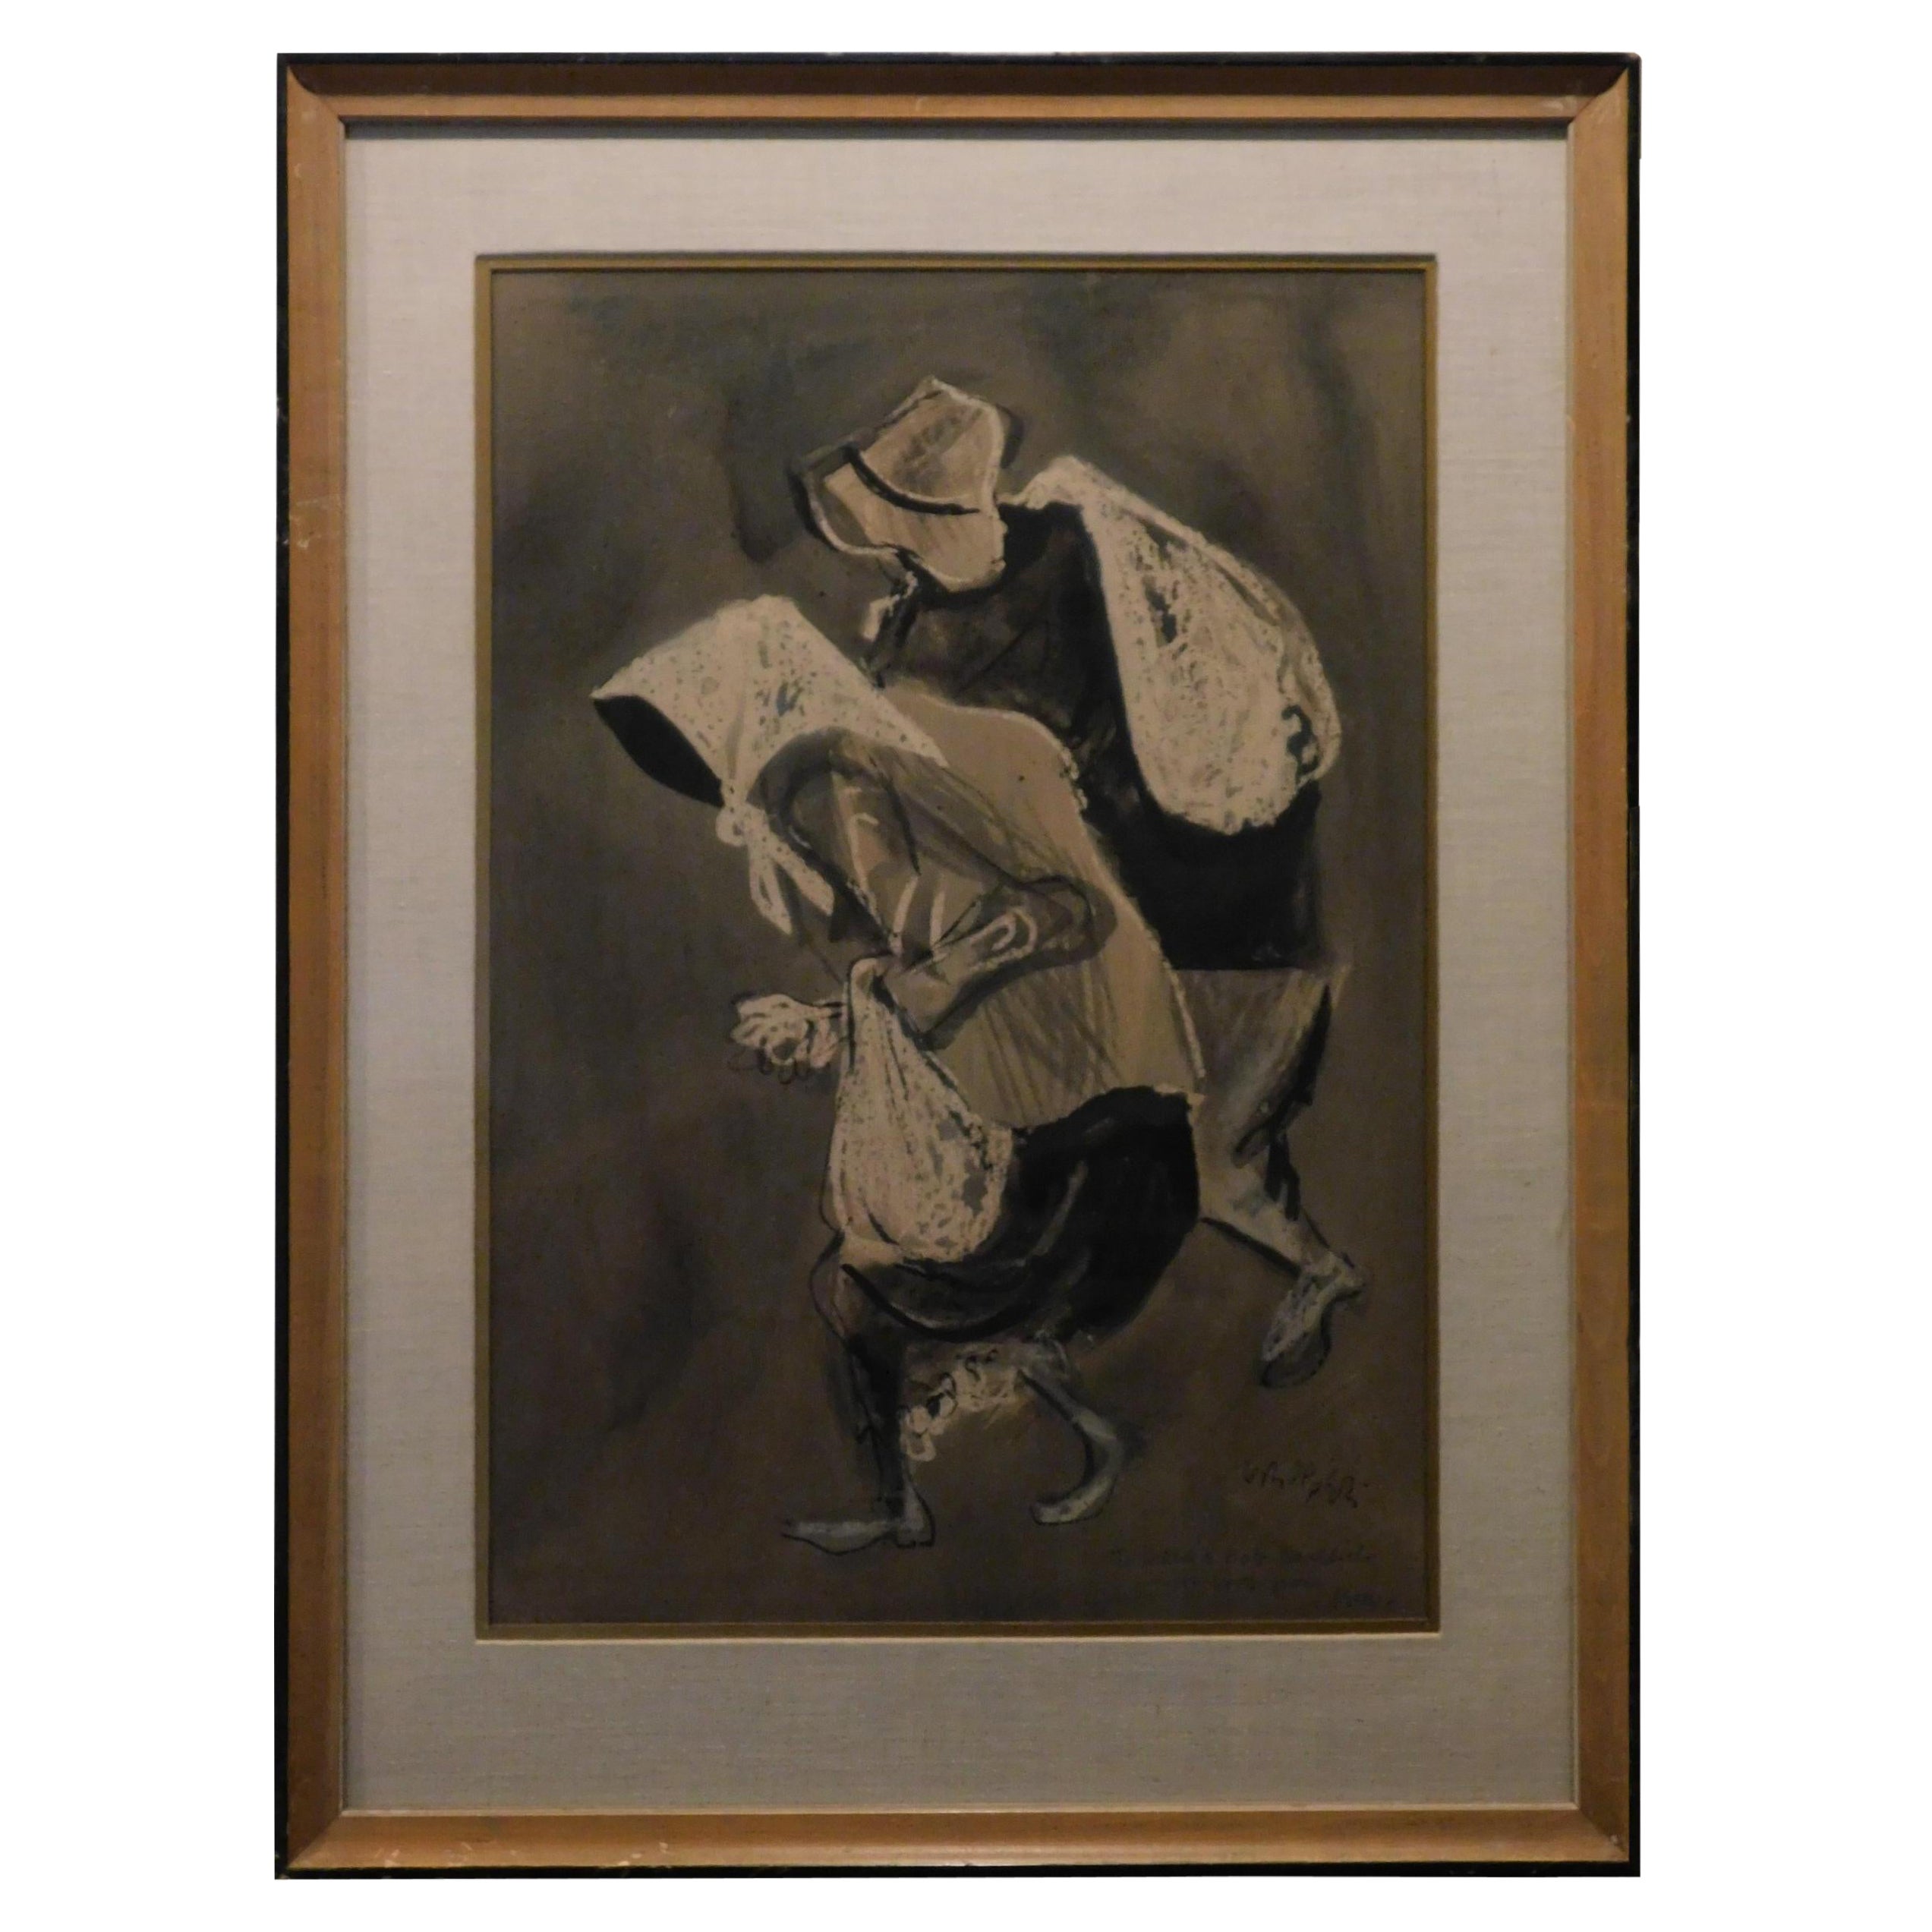 William Gropper WPA Artist Watercolor in Grisaille, circa 1932- “Uprooted”